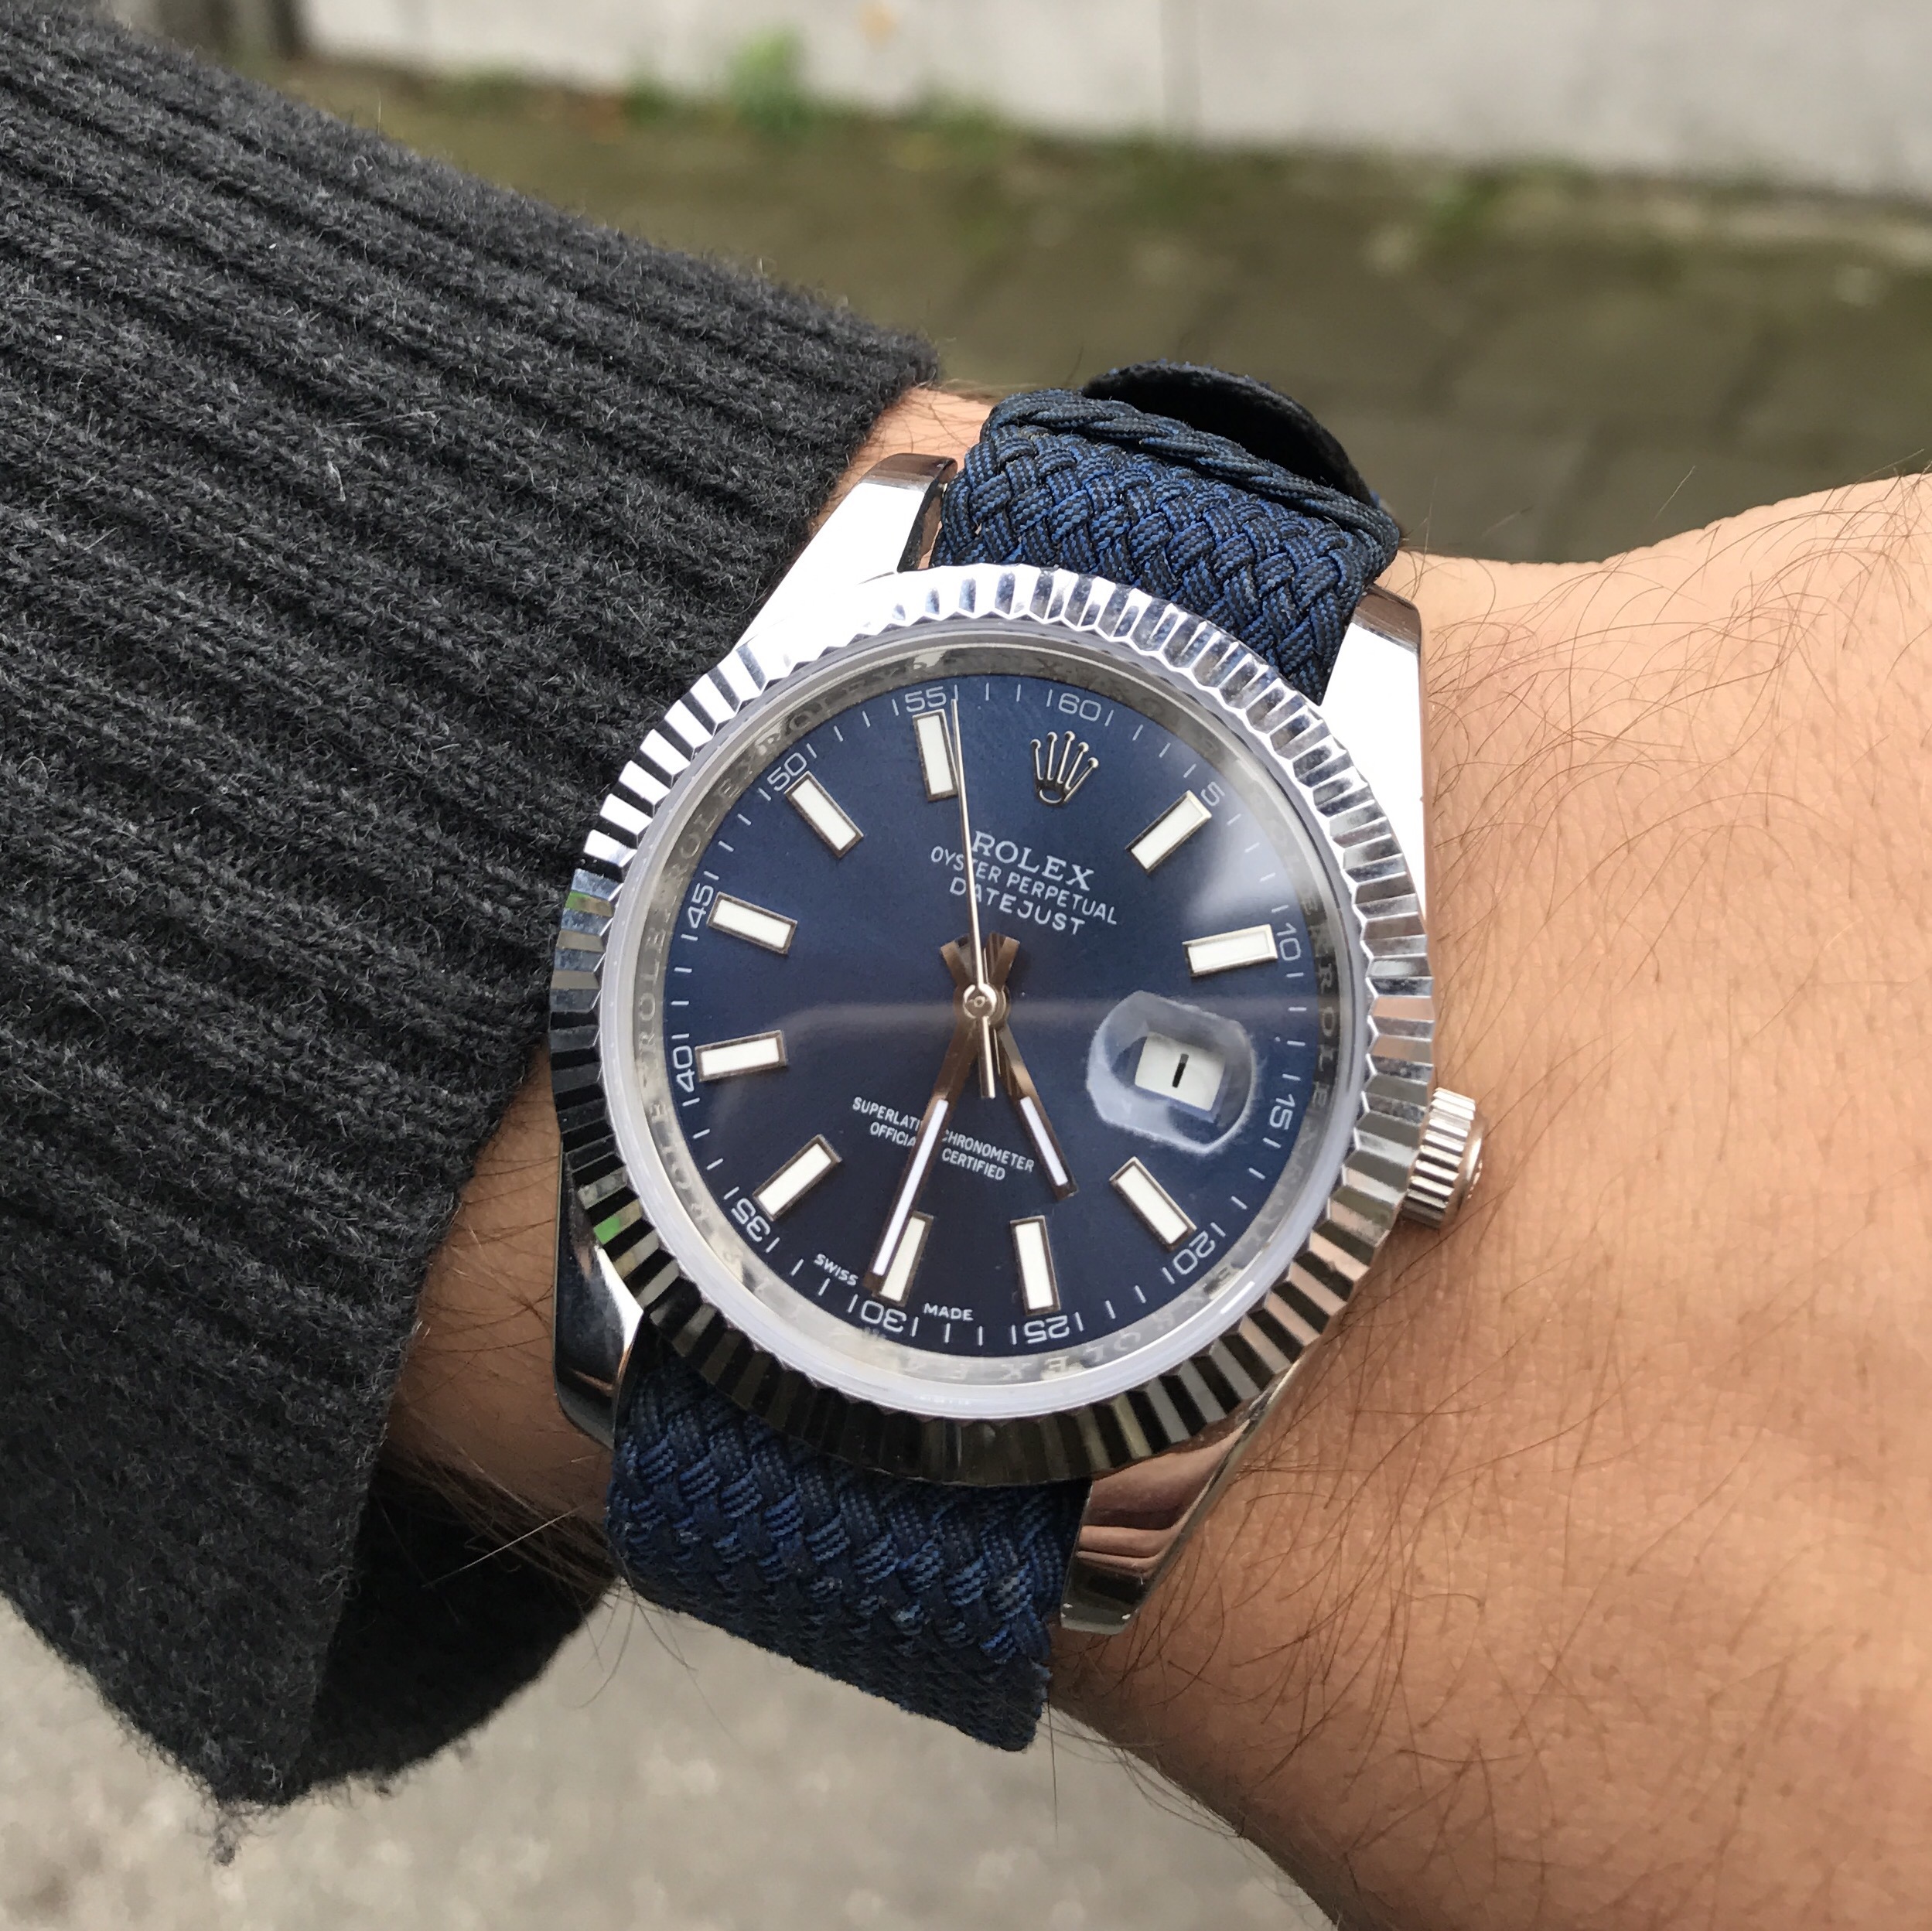 datejust 41 on leather strap